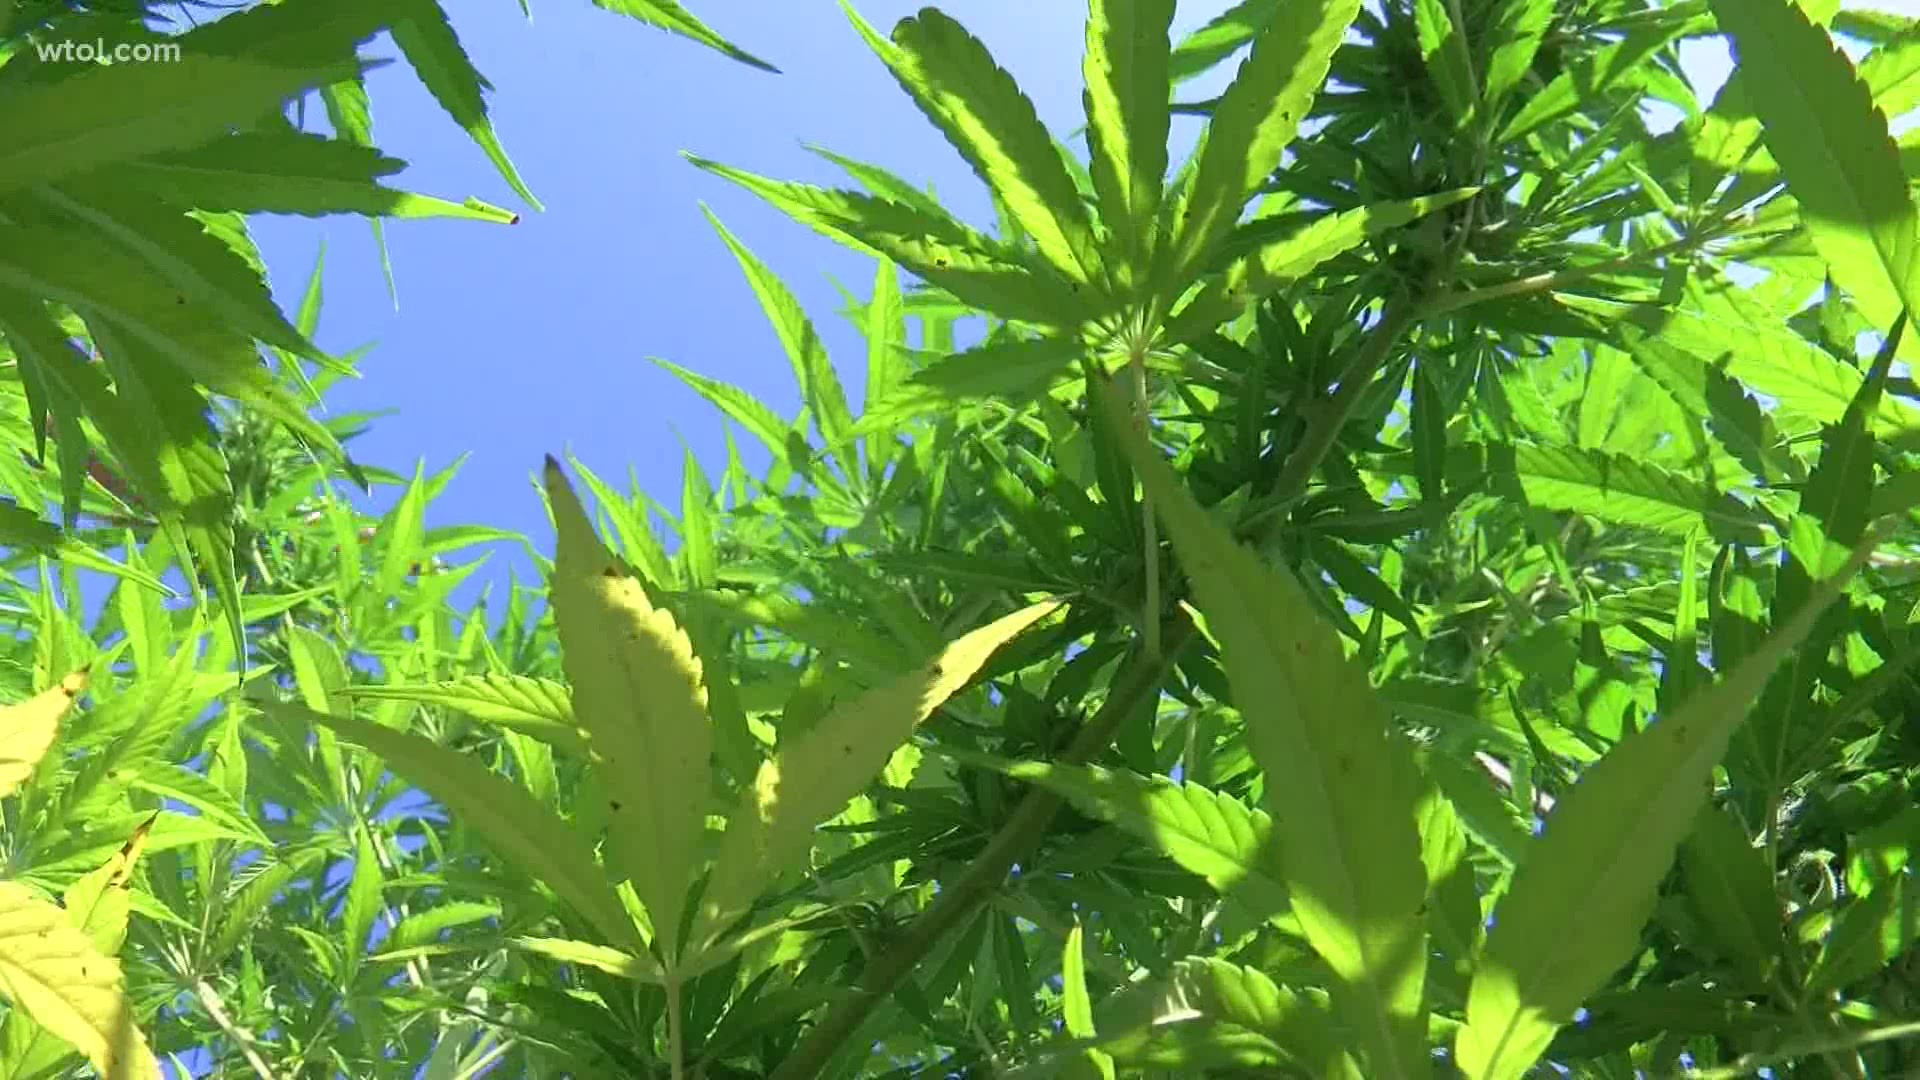 Mike Gaynier is about to harvest his first hemp crop after seeing a growth in the CBD market. He wants people to know a few things about hemp.